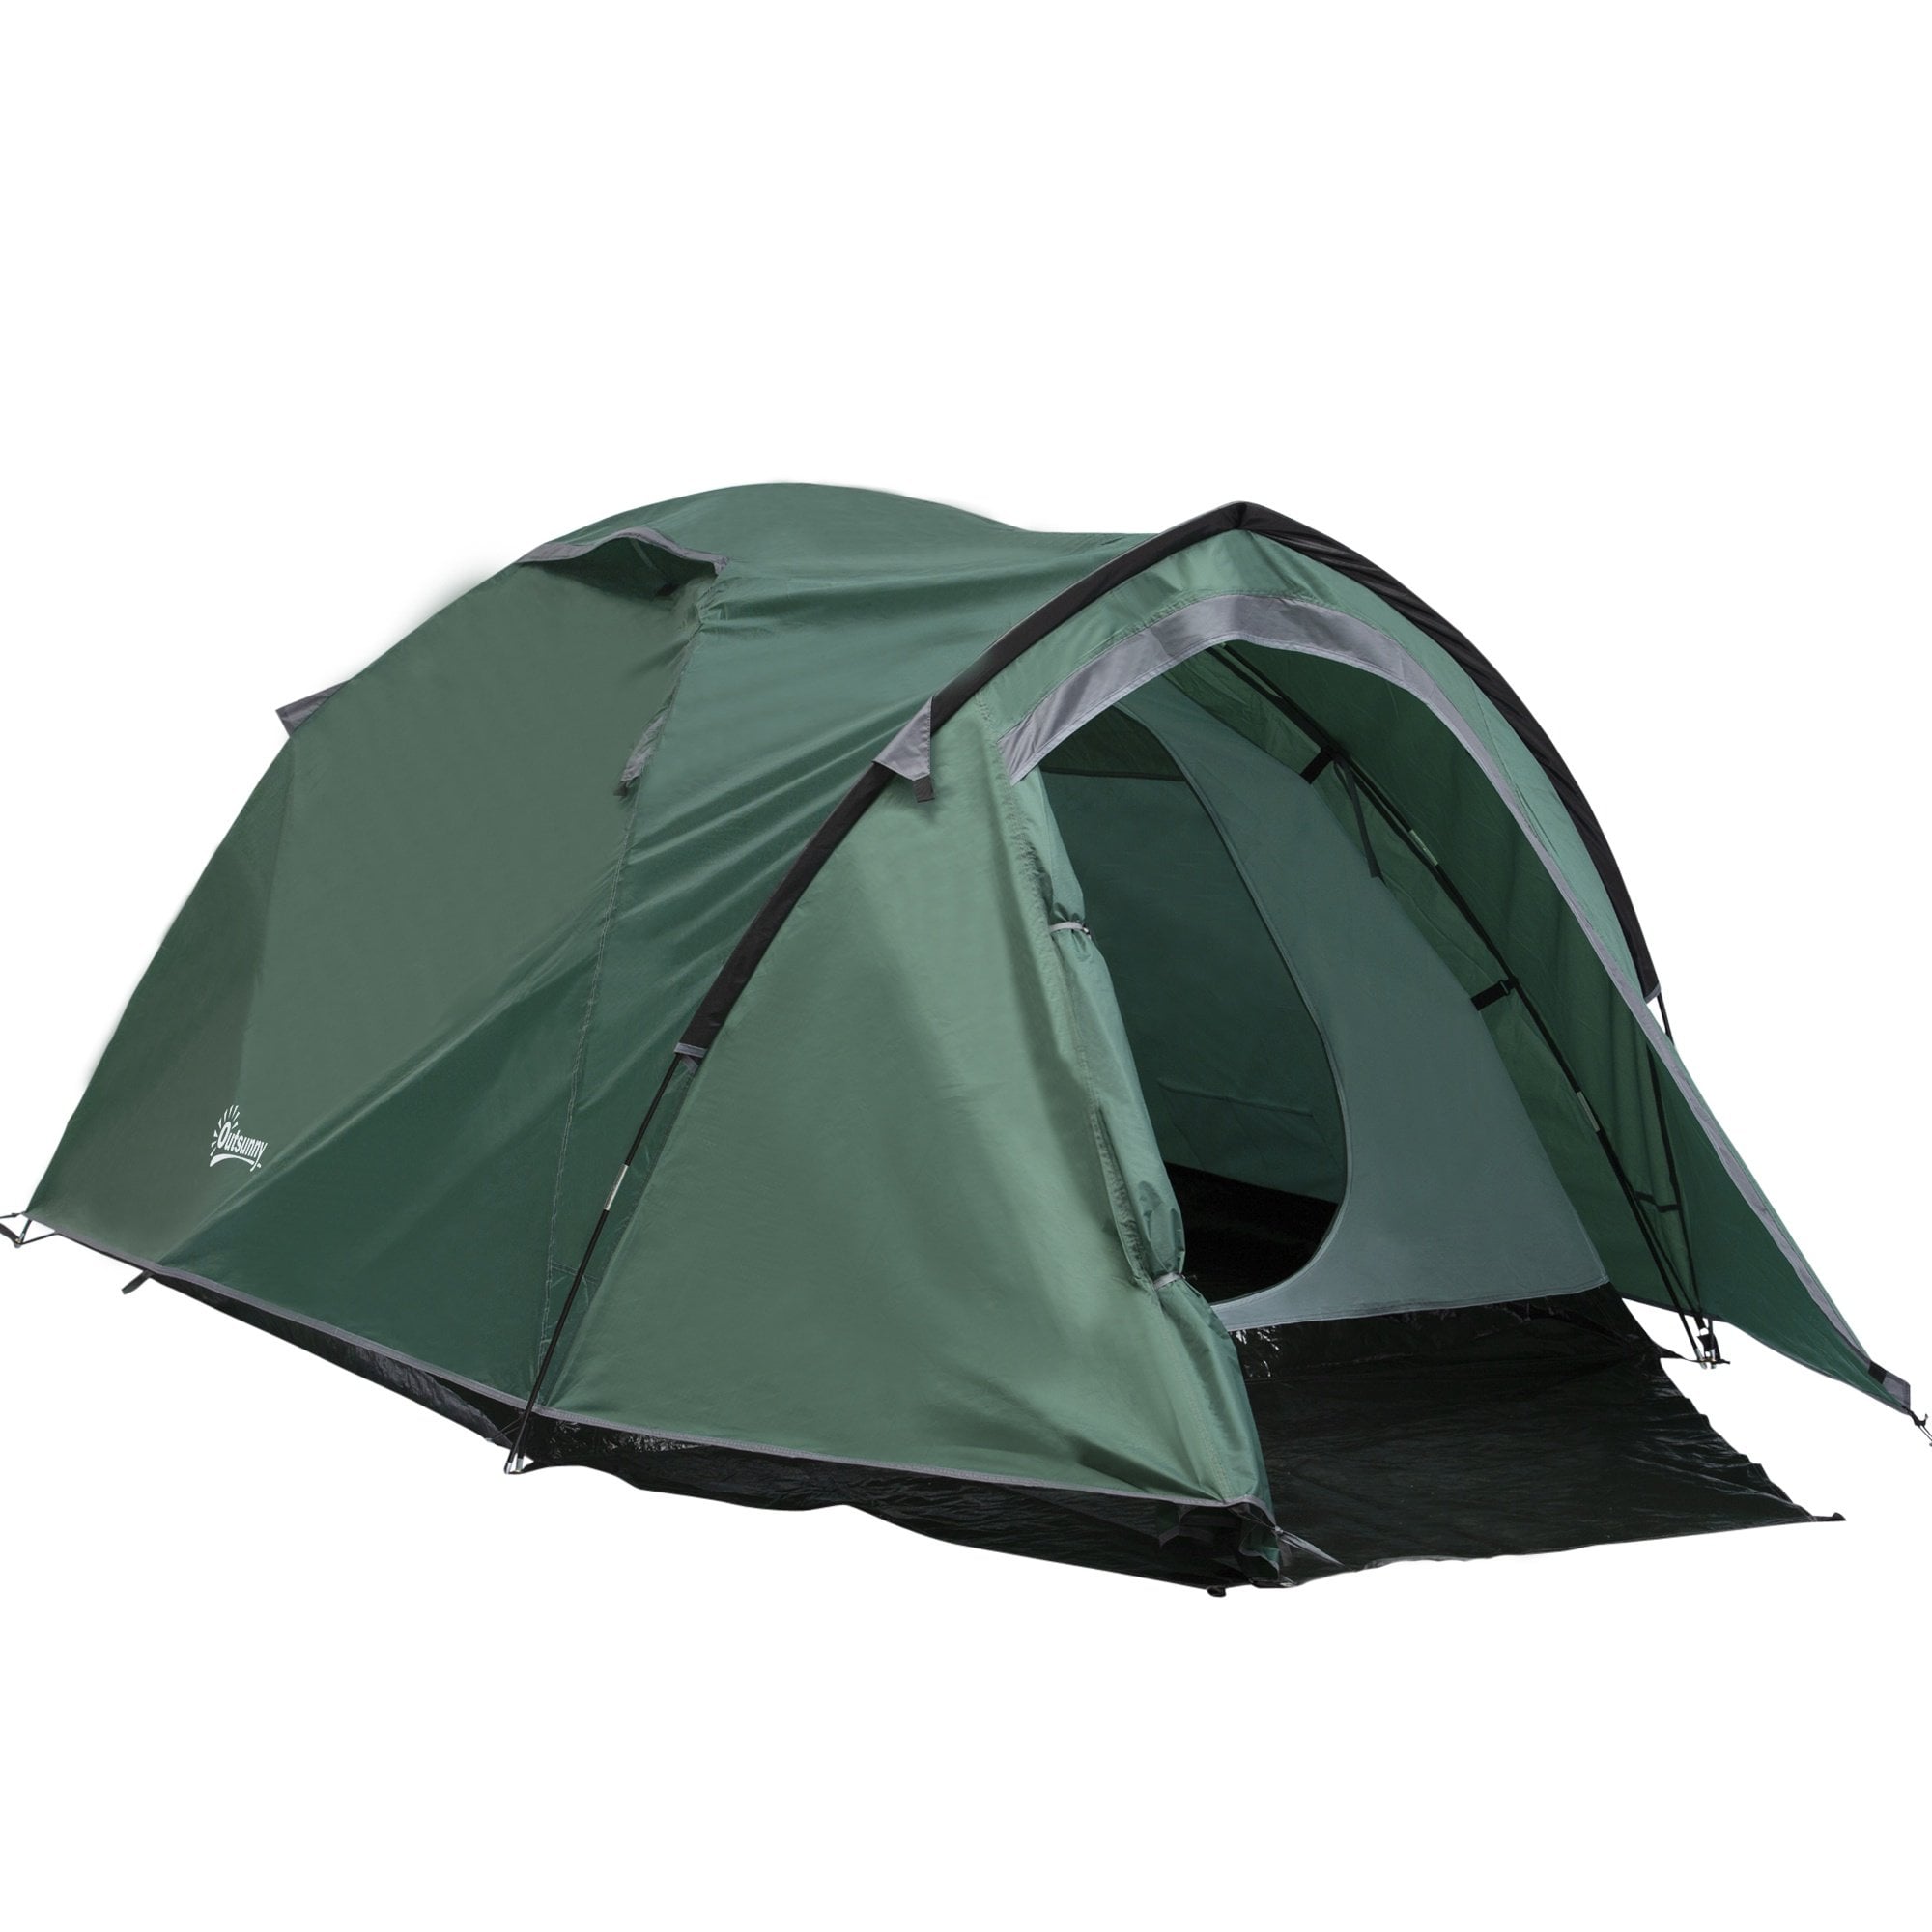 Outsunny Camping Dome Tent 2 Room for 3-4 Person with Weatherproof Vestibule Backpacking Tent Large Windows Lightweight for Fishing & Hiking Green Com